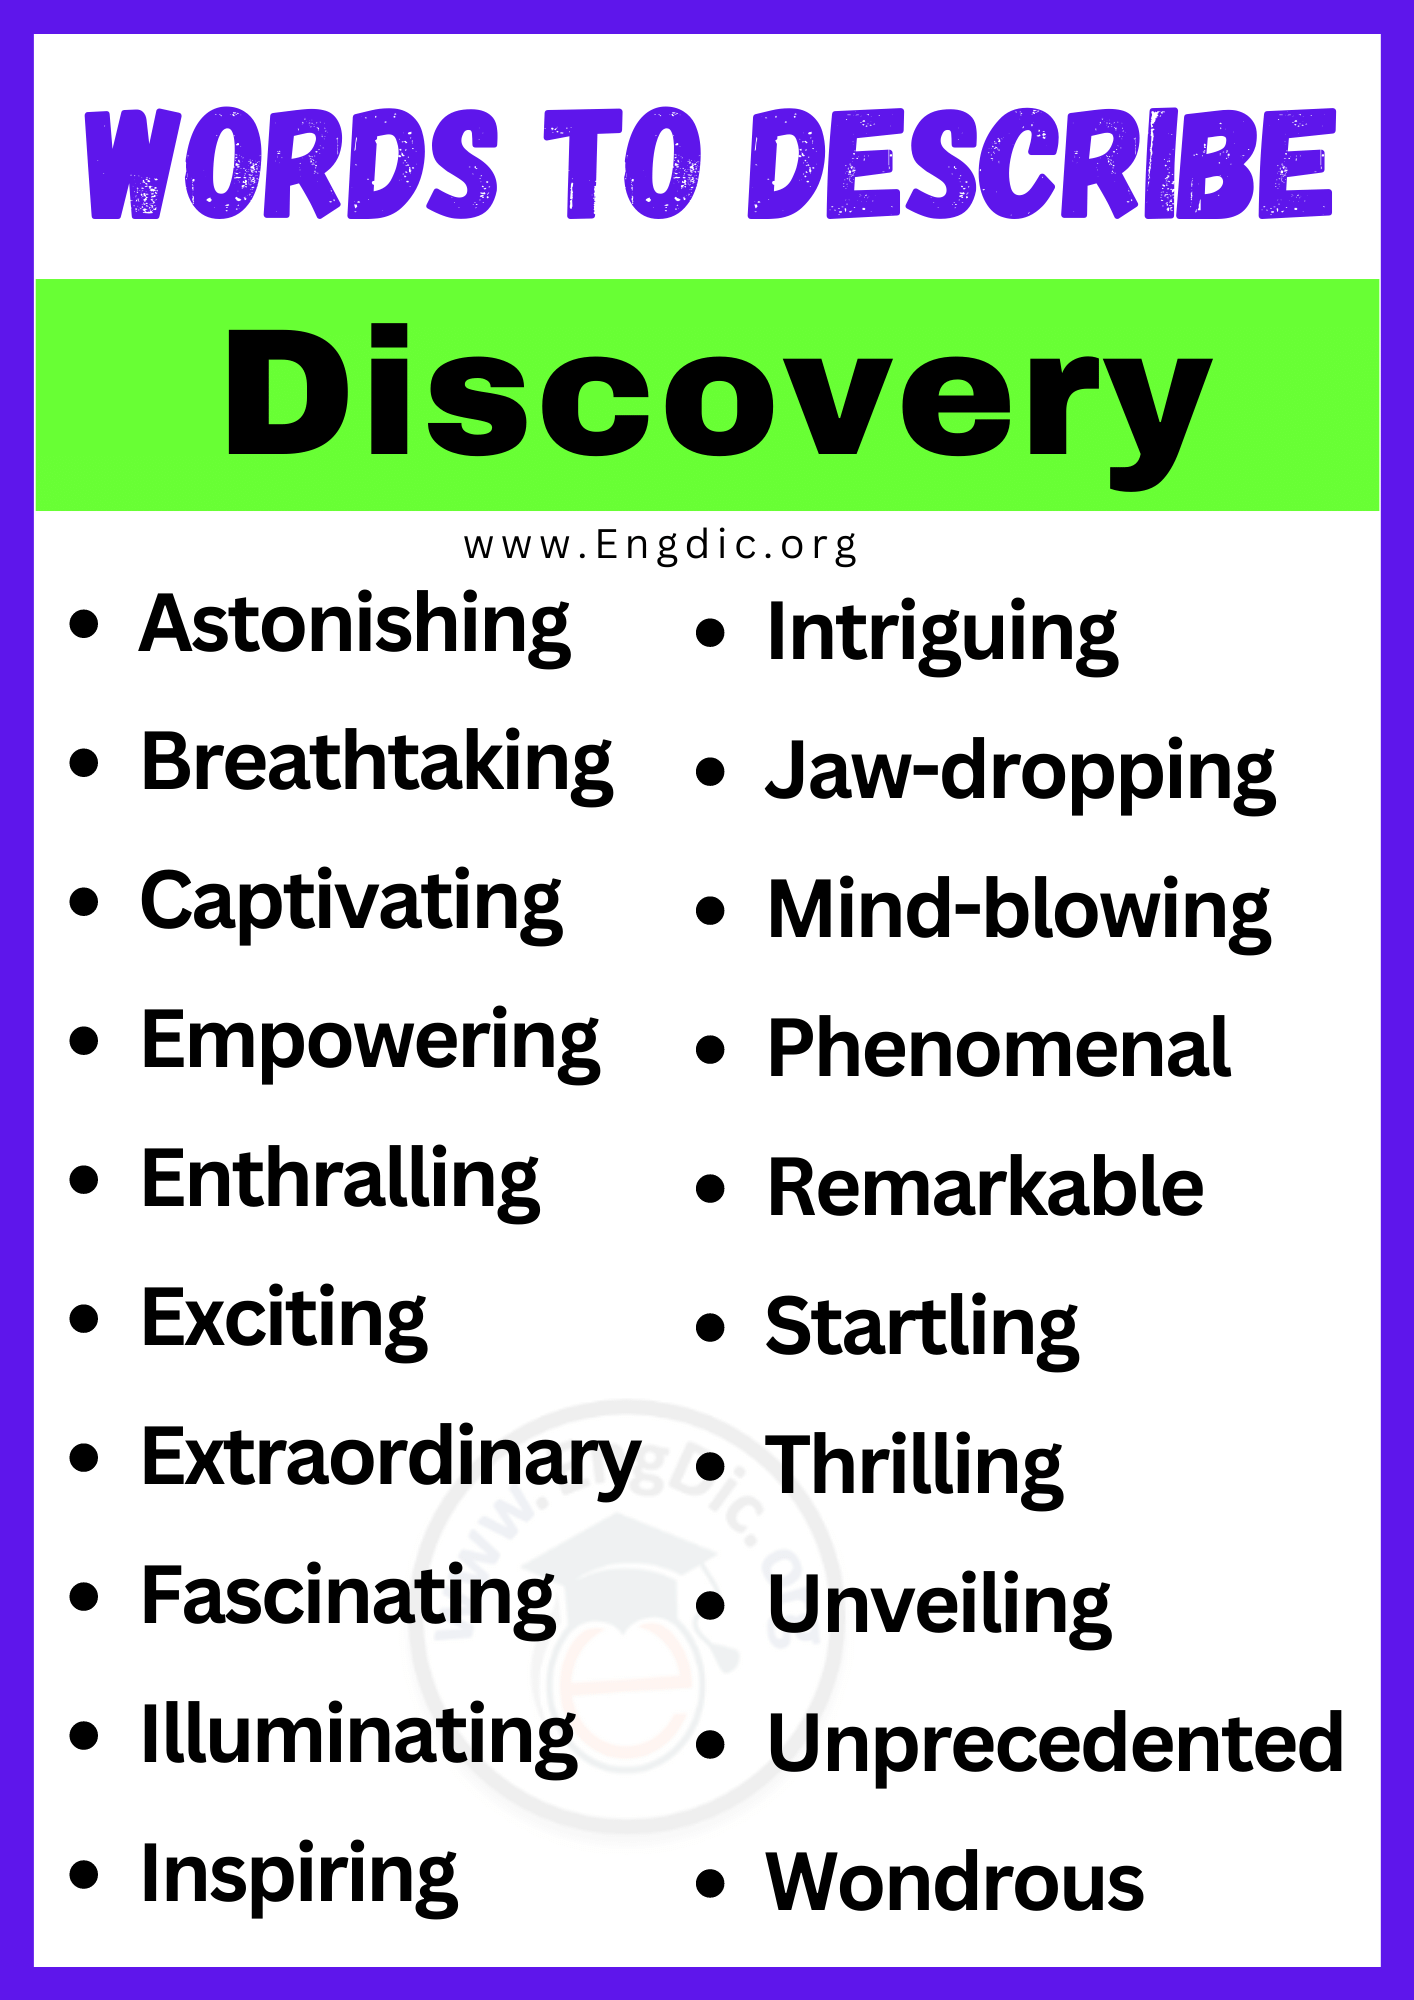 Words to Describe Discovery